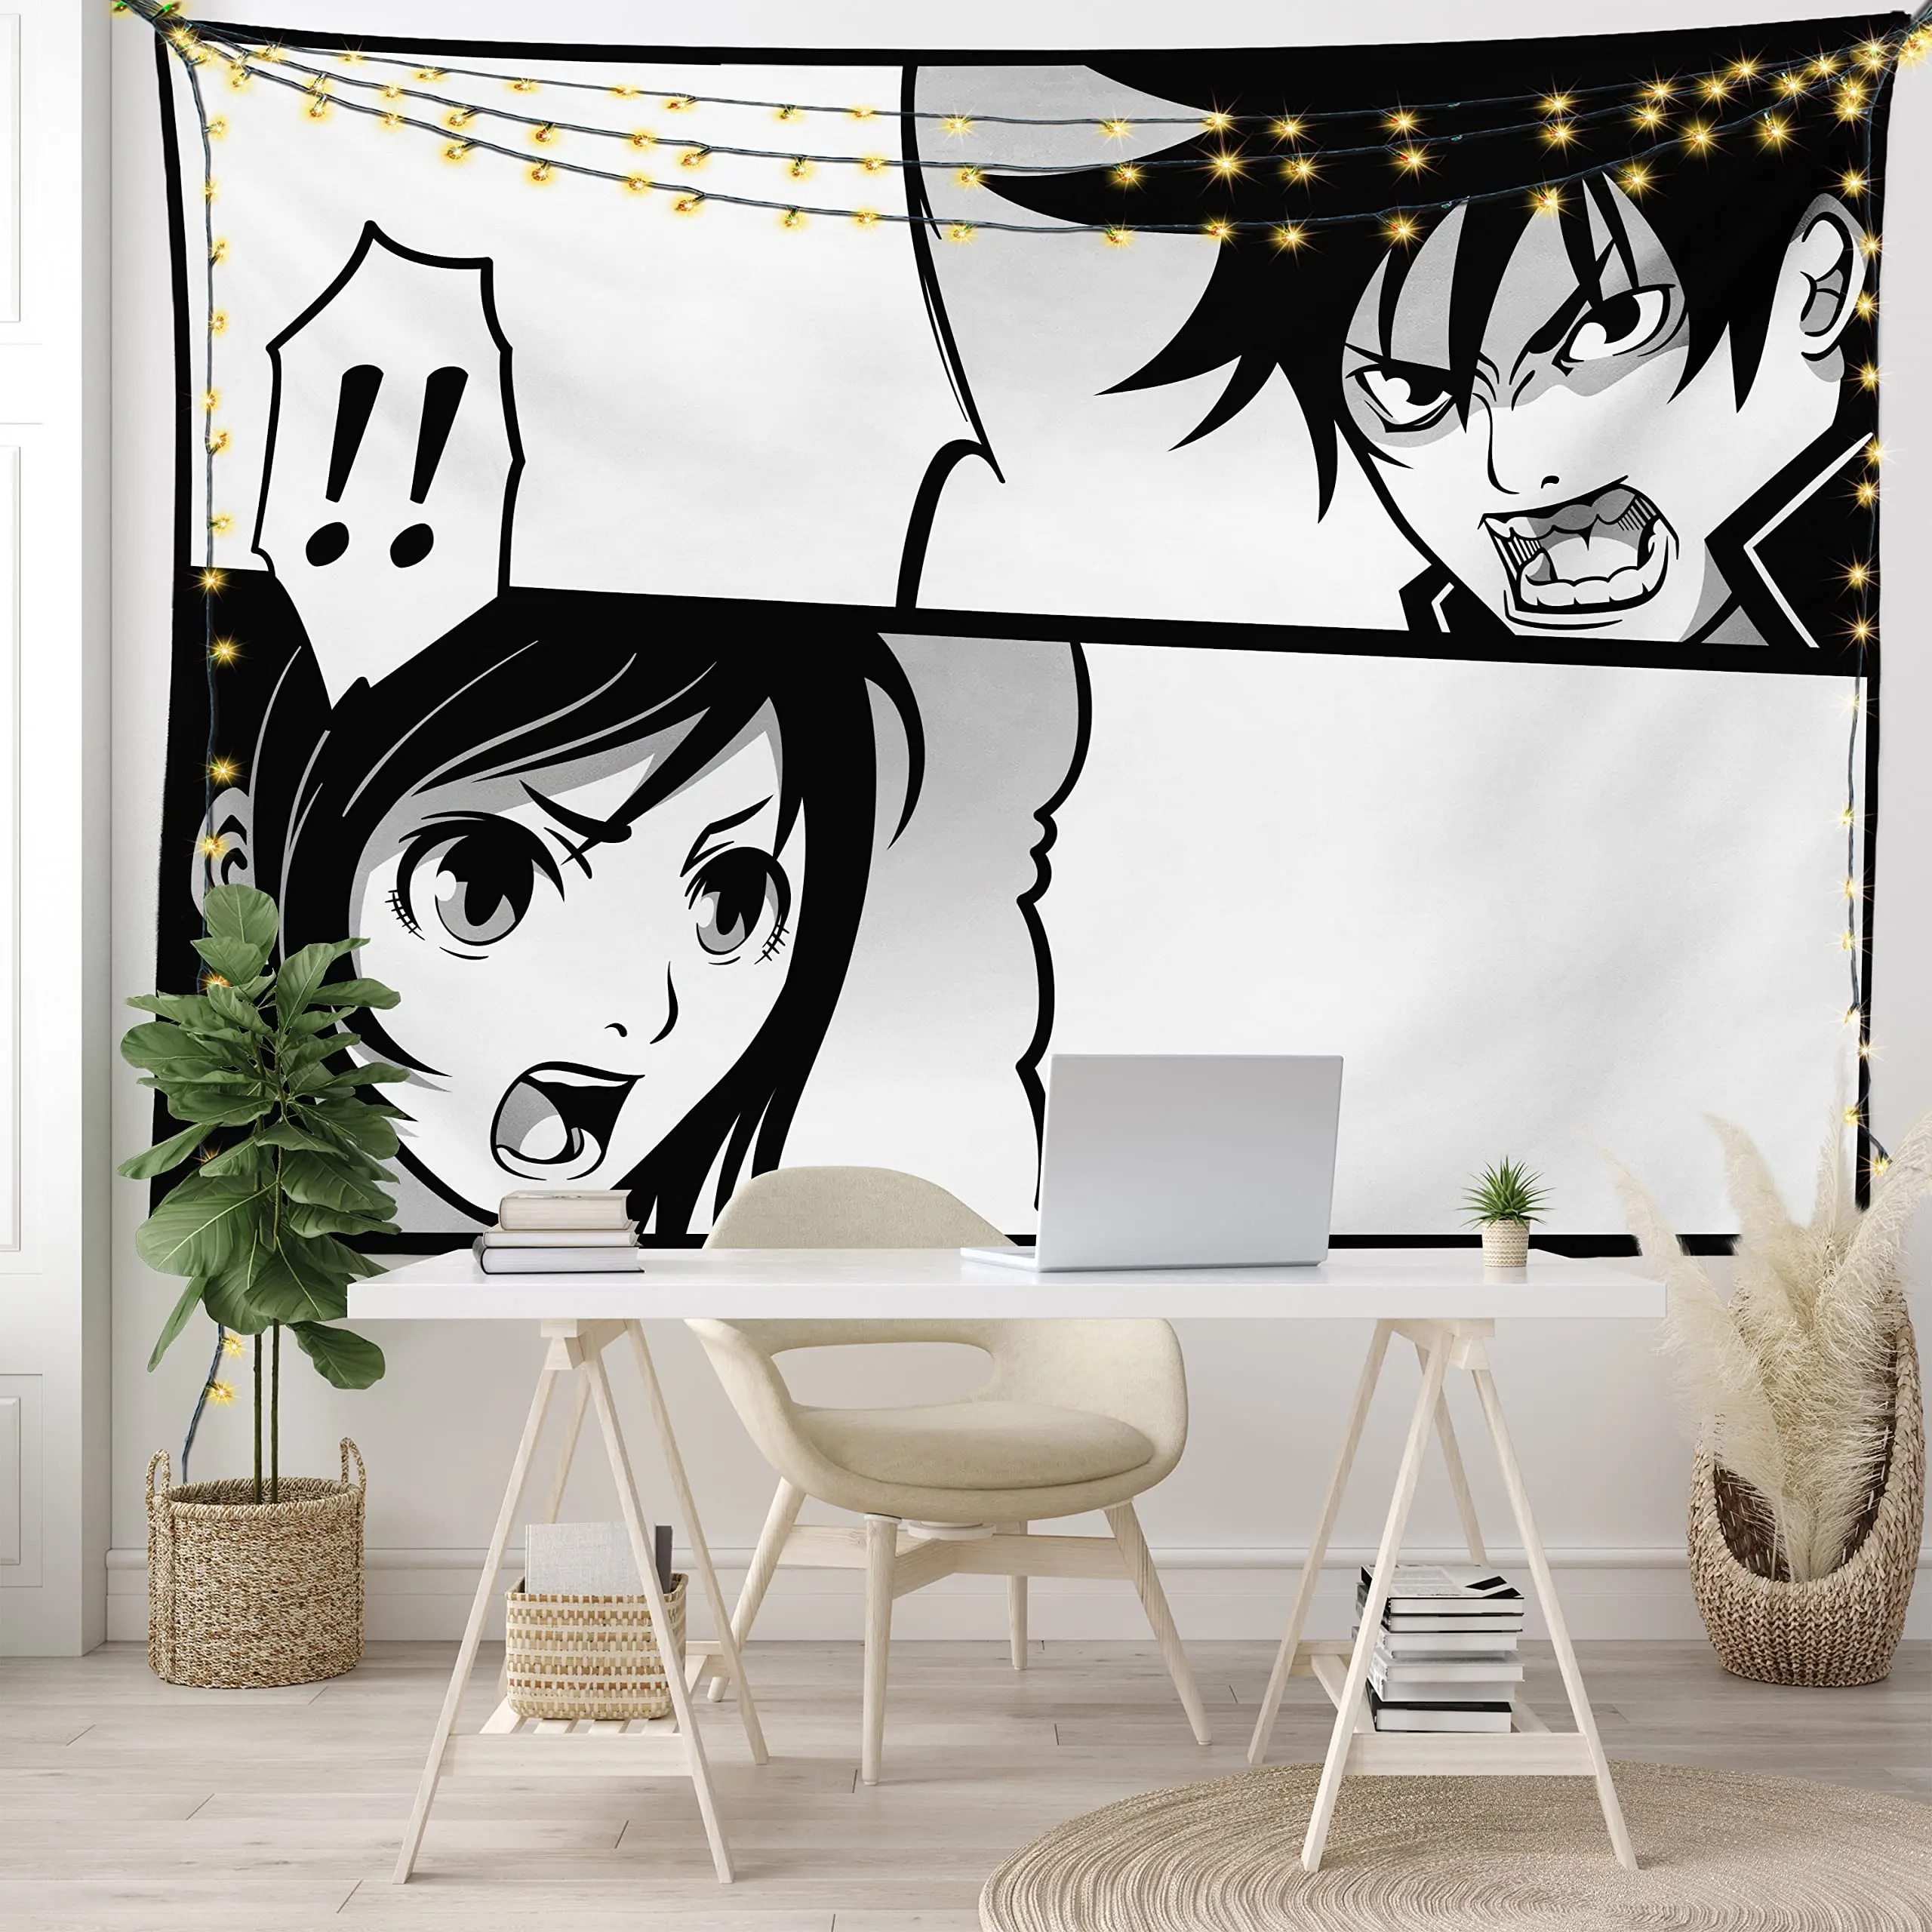 

Anime Tapestry,Japanese Comics Strip Boy and Girl Fight Scene Manga Image Cartoon Print, Wide Wall Hanging for Bedroom 80X60